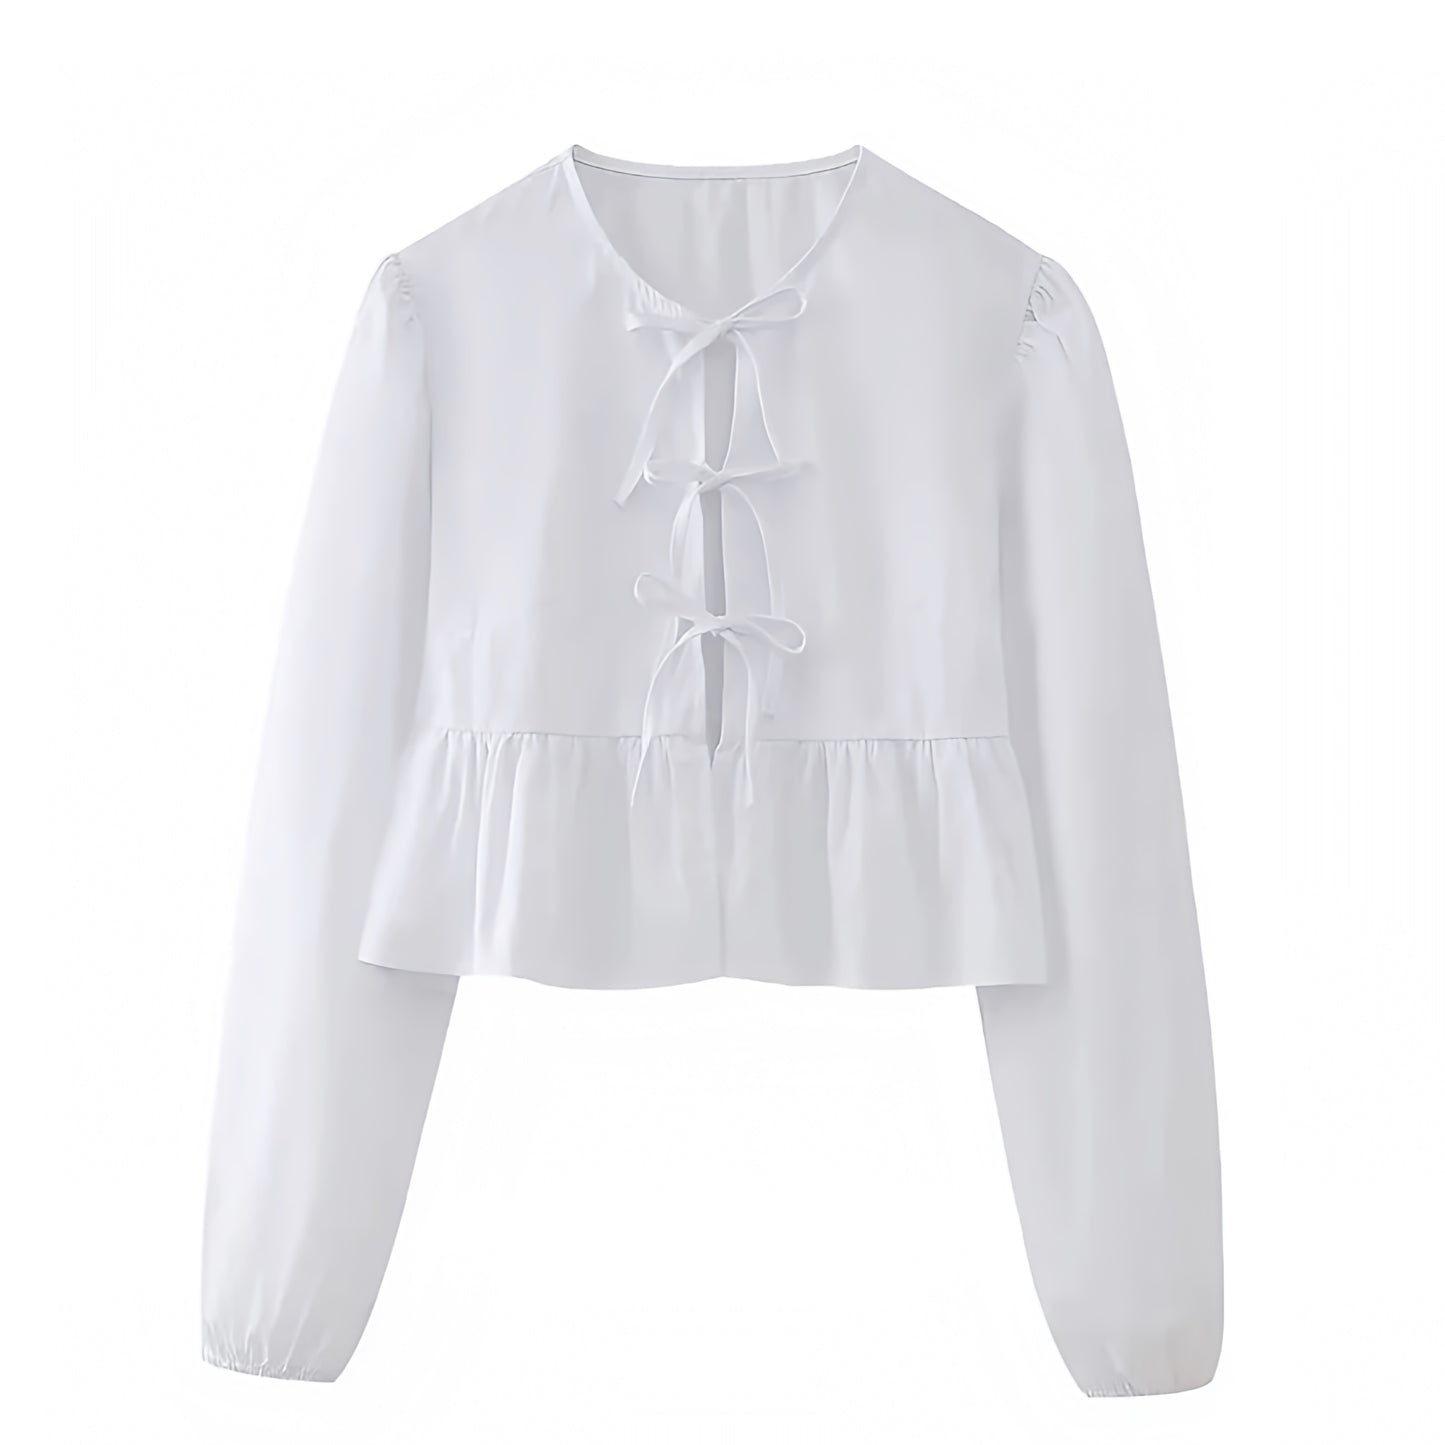 White Bow Lace Up Long Puff Sleeve Camisole Blouse Top